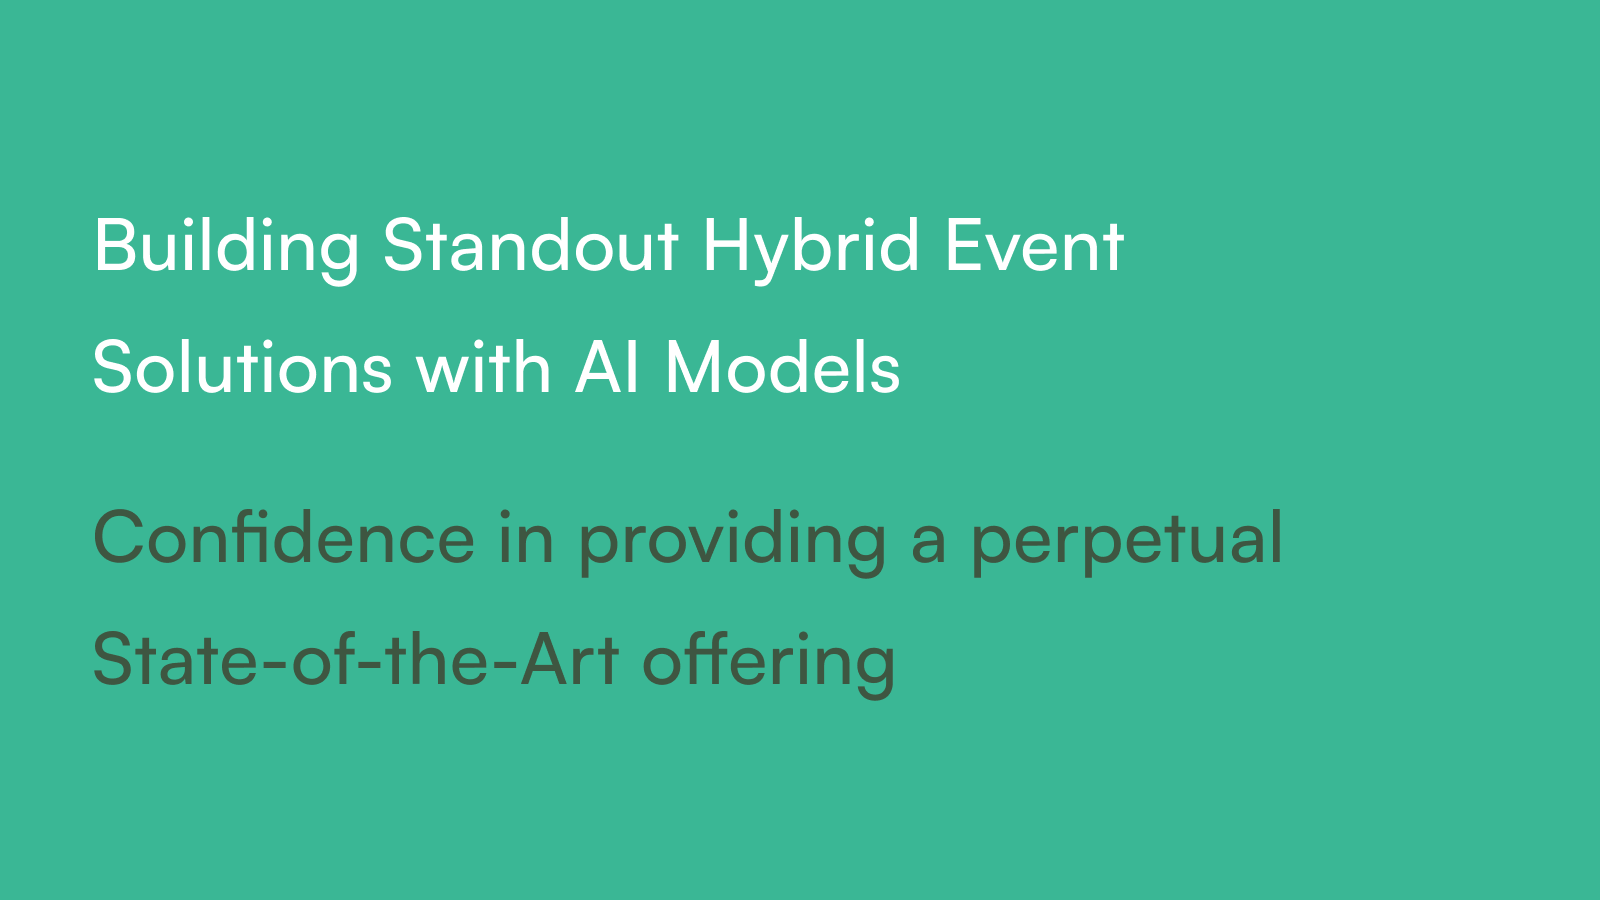 Building Standout Hybrid Event Solutions with AI Models